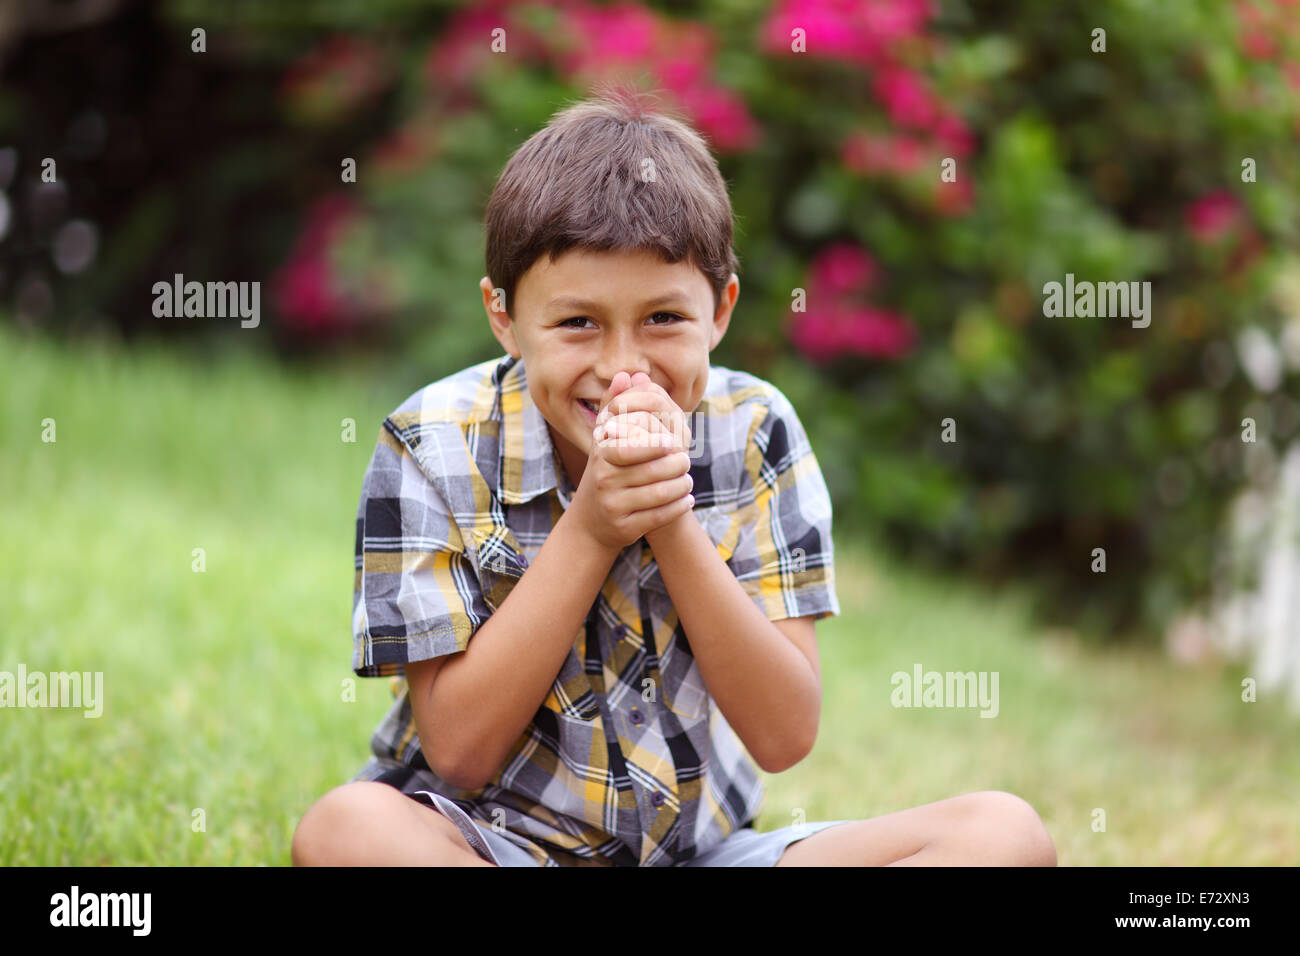 Young boy sitting outside laughing Stock Photo